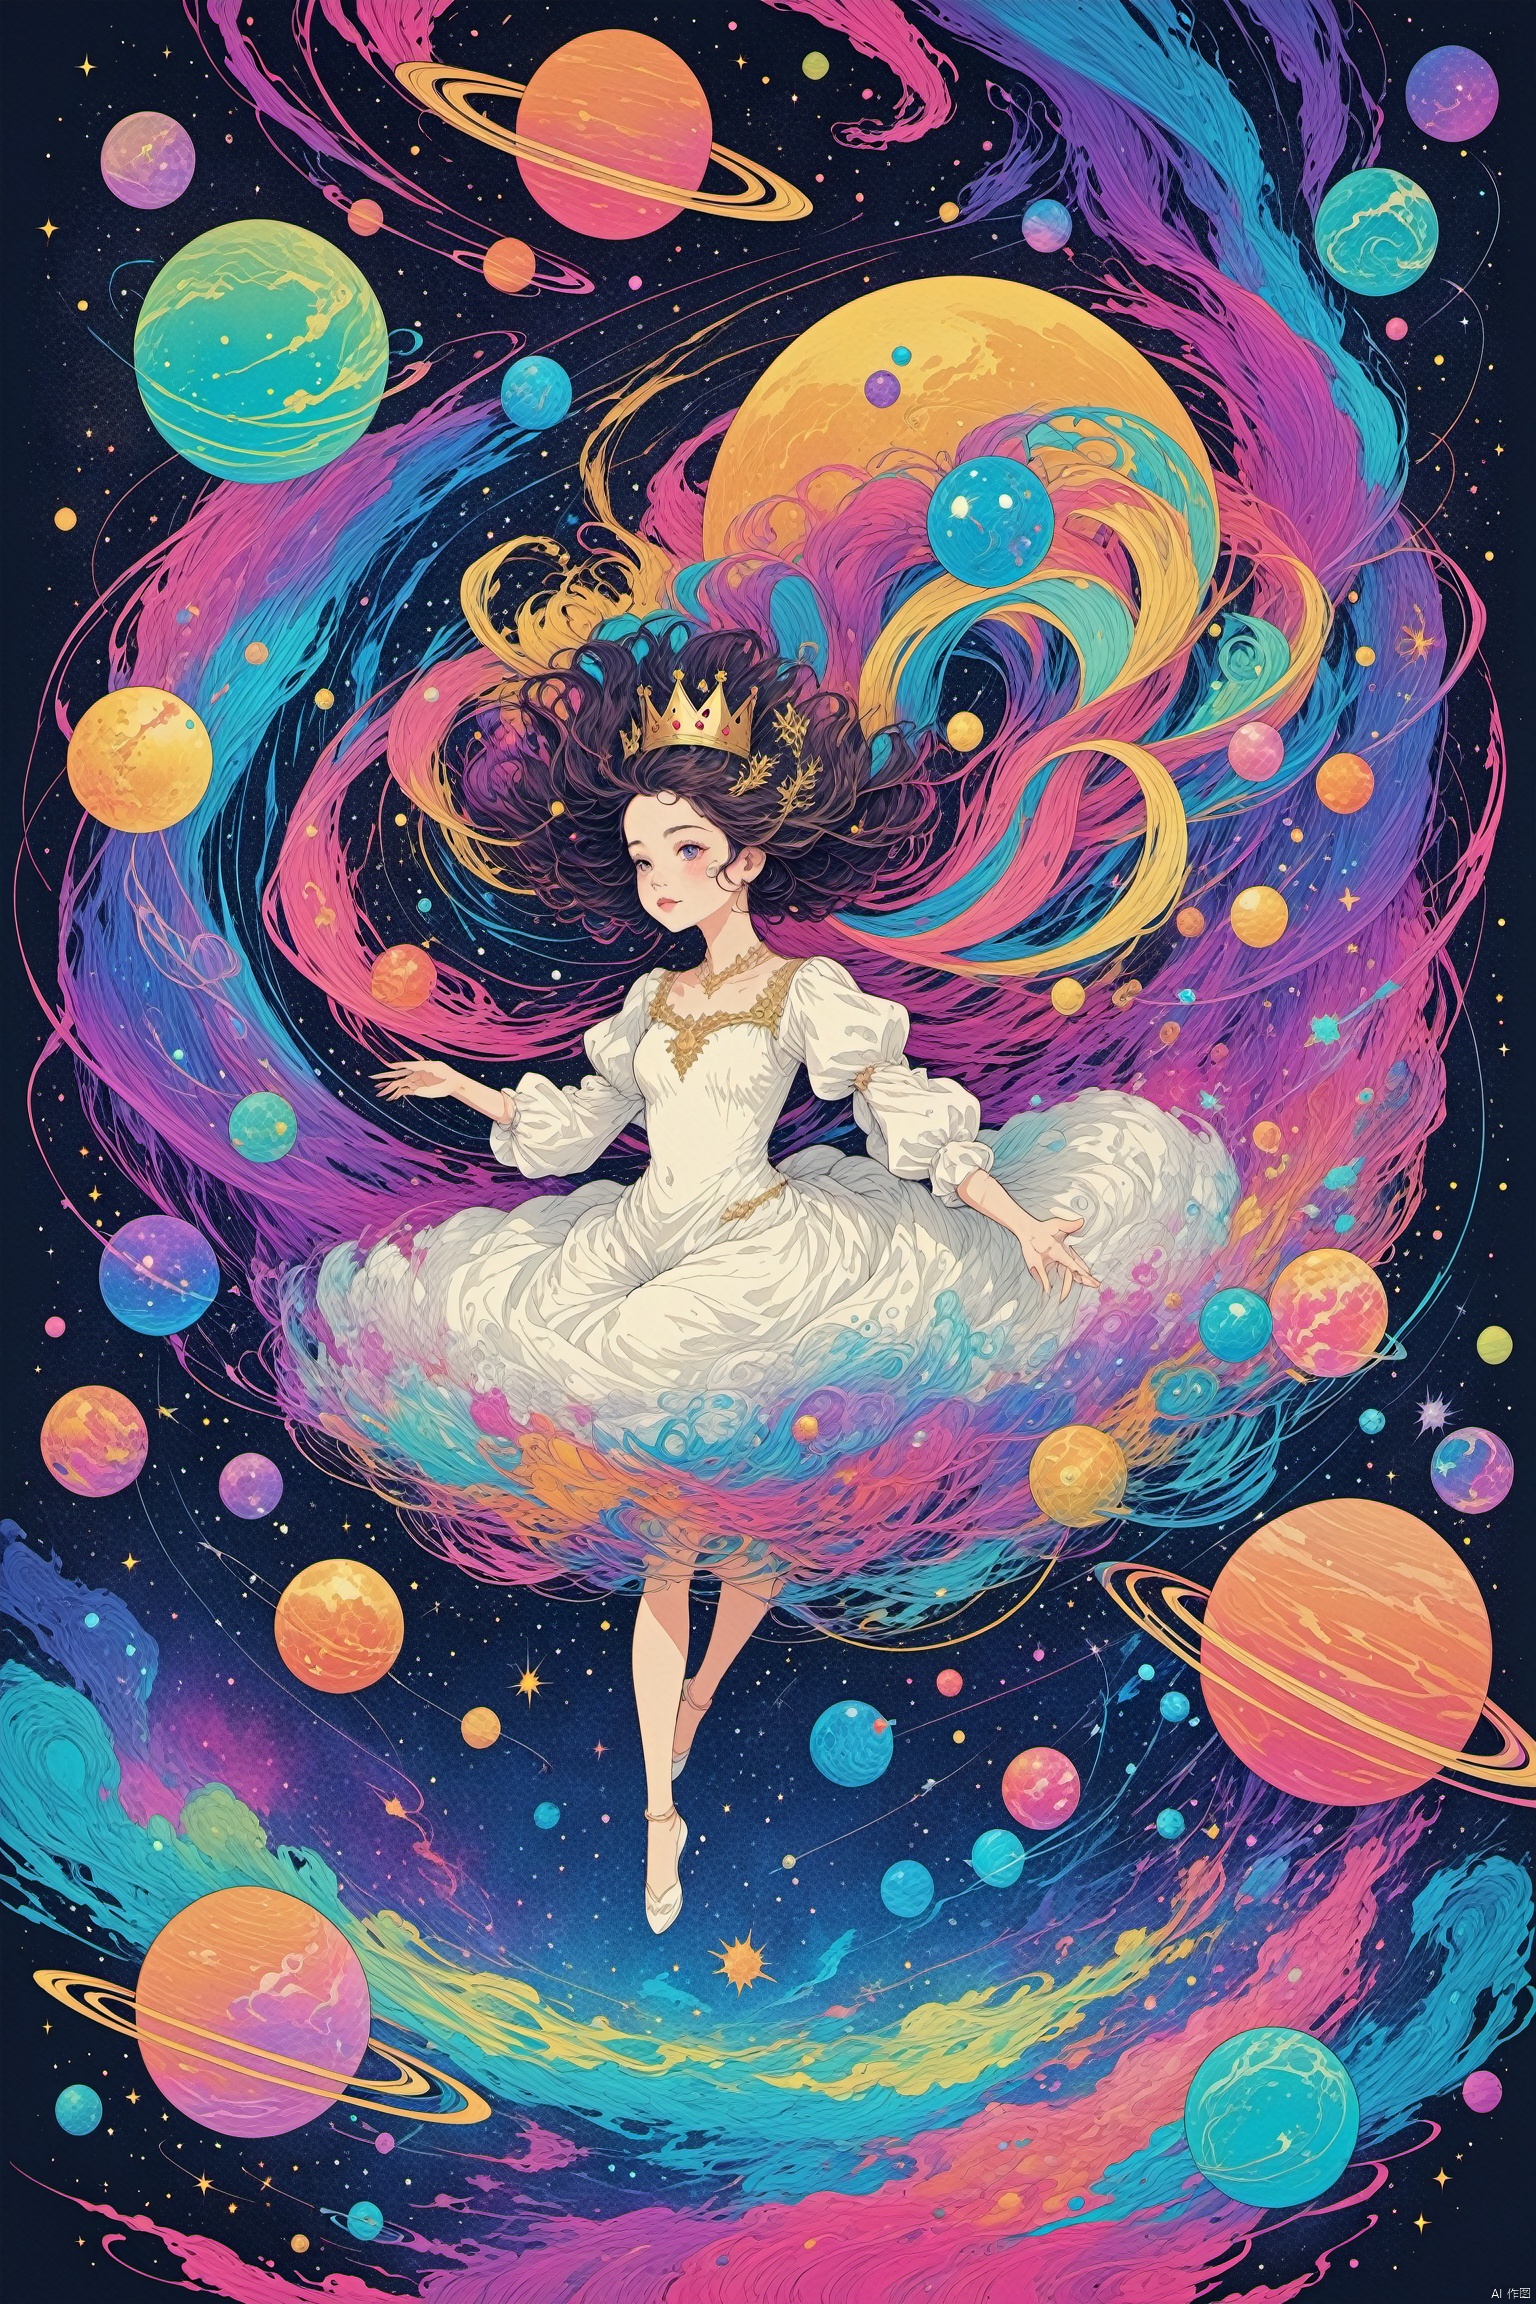 line art,line style,as style,best quality,masterpiece,
The image depicts a girl with a crown on her head, flying through a colorful and abstract universe. She is surrounded by swirling patterns that resemble galaxies and planets, and there are small bubbles and spheres floating around her. digital art, illustration, girl, crown, flying, universe, galaxy, planet, bubble, sphere,